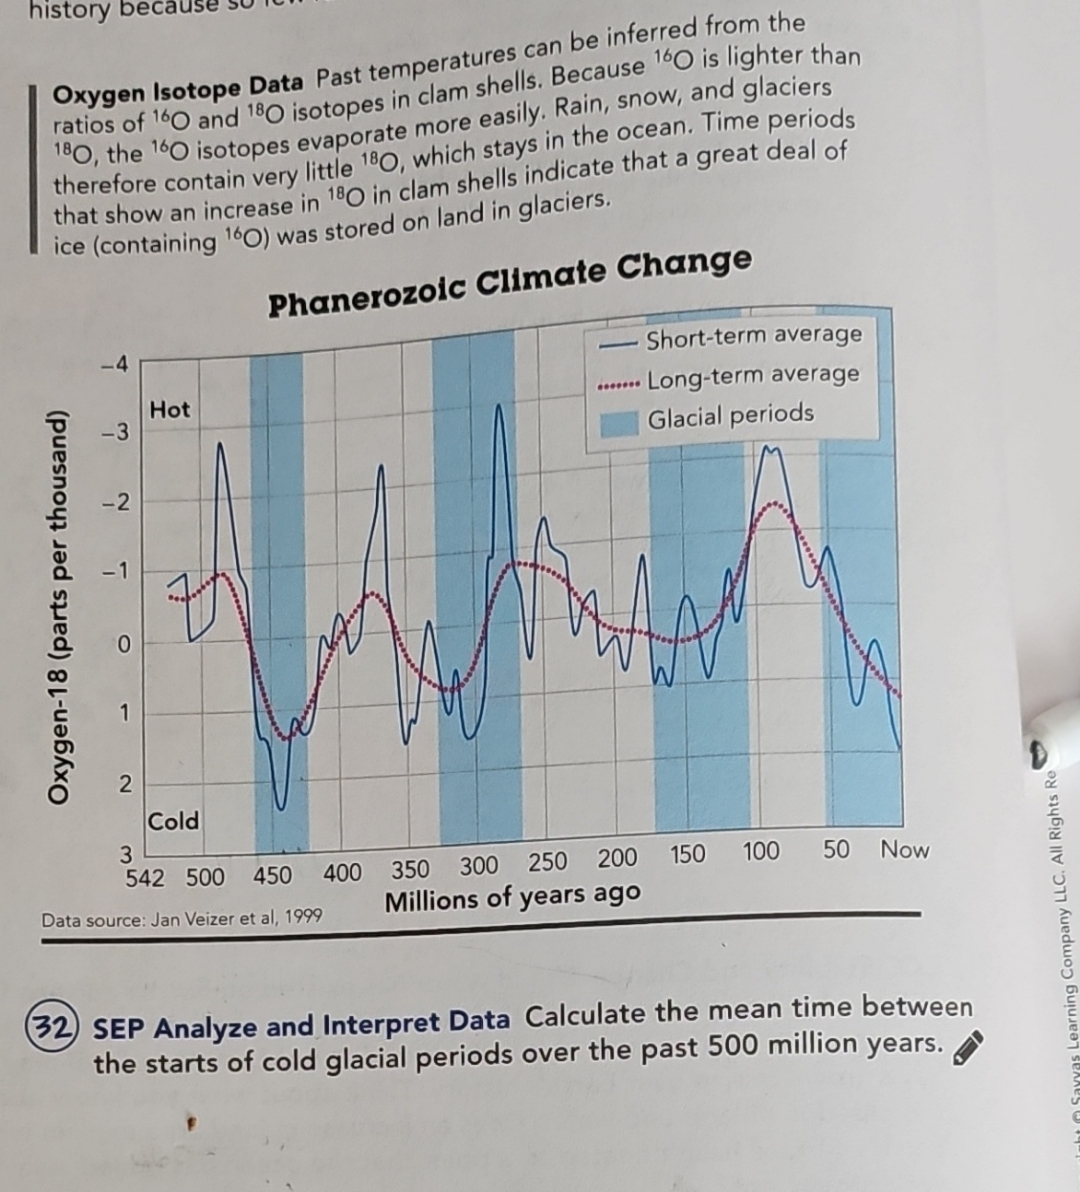 history bec
Oxygen Isotope Data Past temperatures can be inferred from the
ratios of 160 and 180 isotopes in clam shells. Because 160 is lighter than
180, the 160 isotopes evaporate more easily. Rain, snow, and glaciers
therefore contain very little 180, which stays in the ocean. Time periods
that show an increase in 180 in clam shells indicate that a great deal of
ice (containing 160) was stored on land in glaciers.
Phanerozoic Climate Change
Oxygen-18 (parts per thousand)
4
-3
2
7
1
2
Hot
Cold
3
542 500 450 400
Data source: Jan Veizer et al, 1999
-
*******
300 250 200
350
Millions of years ago
Short-term average
Long-term average
Glacial periods
150 100 50
Now
(32) SEP Analyze and Interpret Data Calculate the mean time between
the starts of cold glacial periods over the past 500 million years.
aYYas Learning Company LLC. All Rights Re